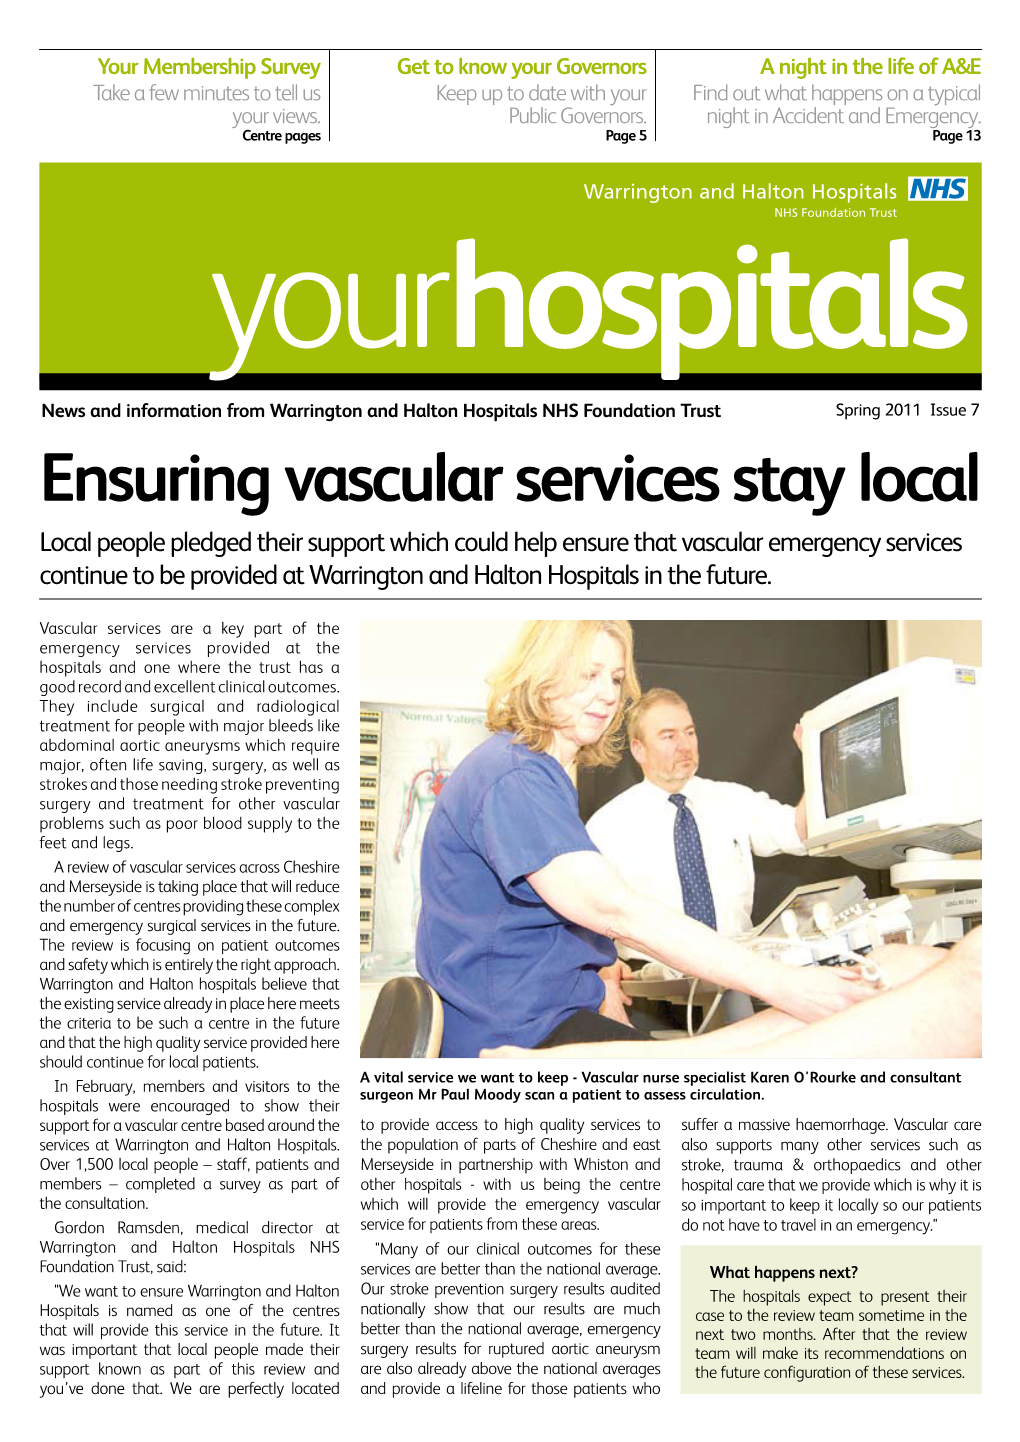 Ensuring Vascular Services Stay Local